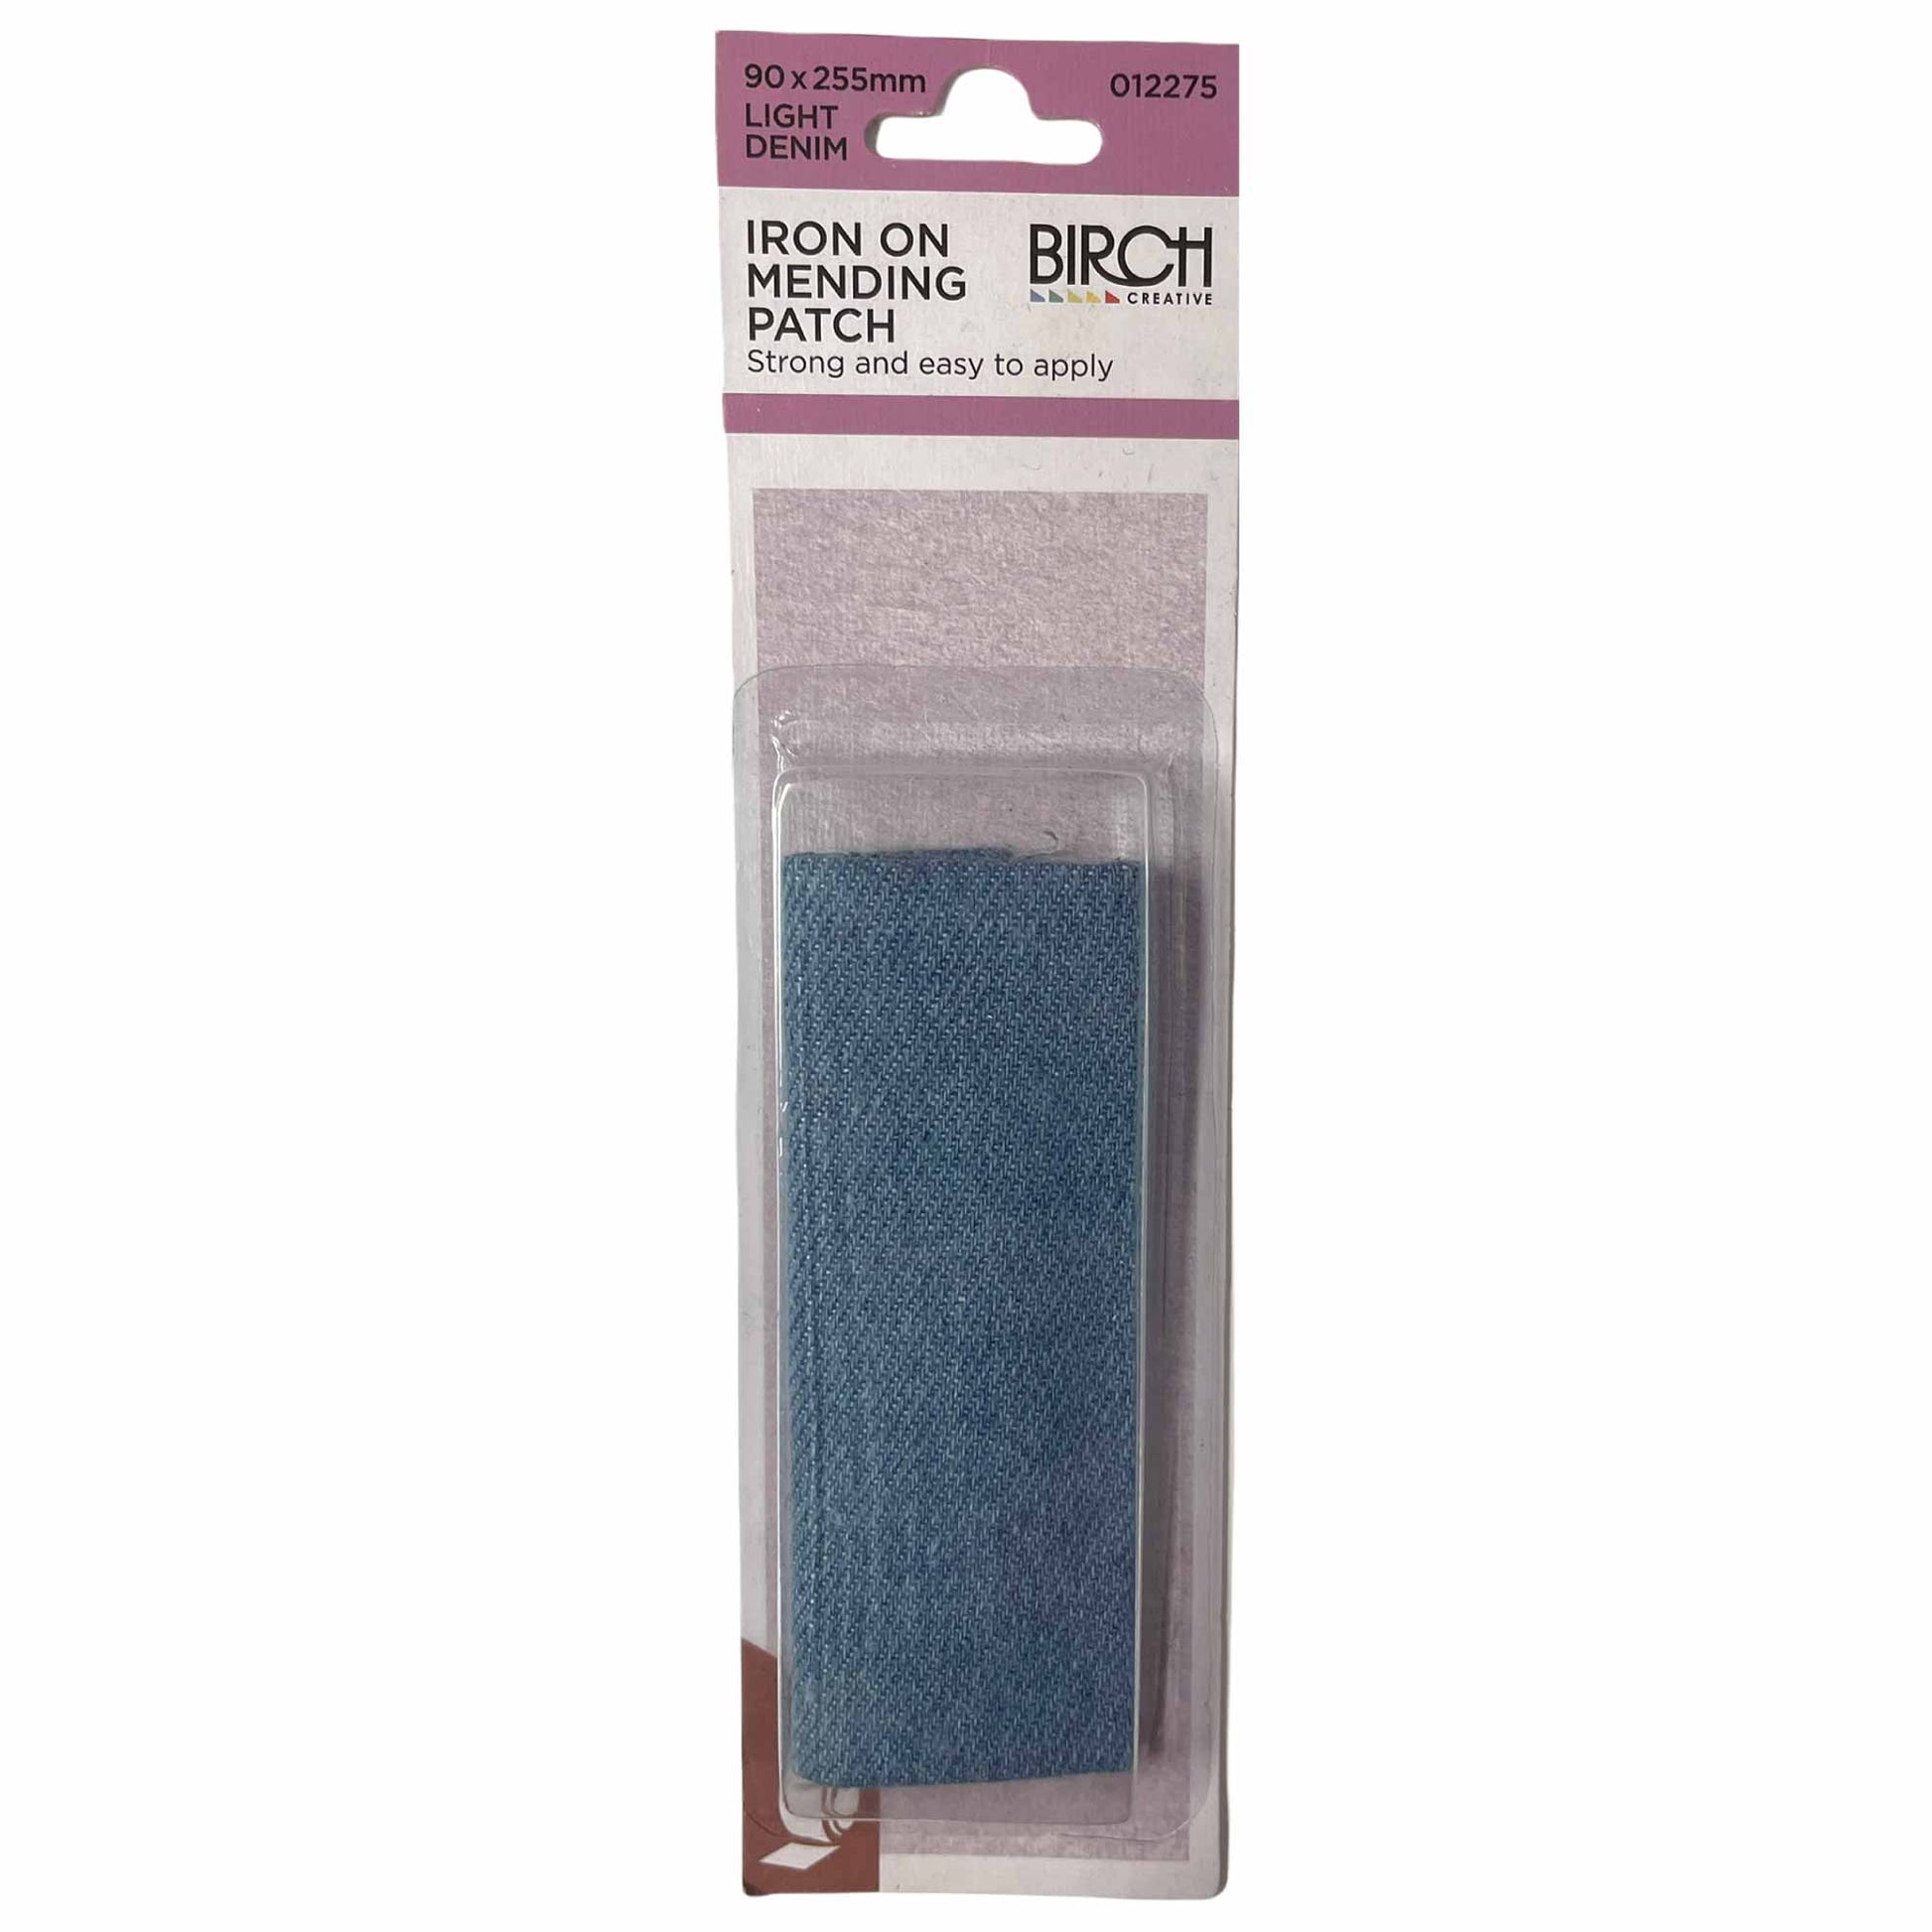 Iron On Mending Patch 90x255mm Cotton Clothes Repair Patches All Colours Birch